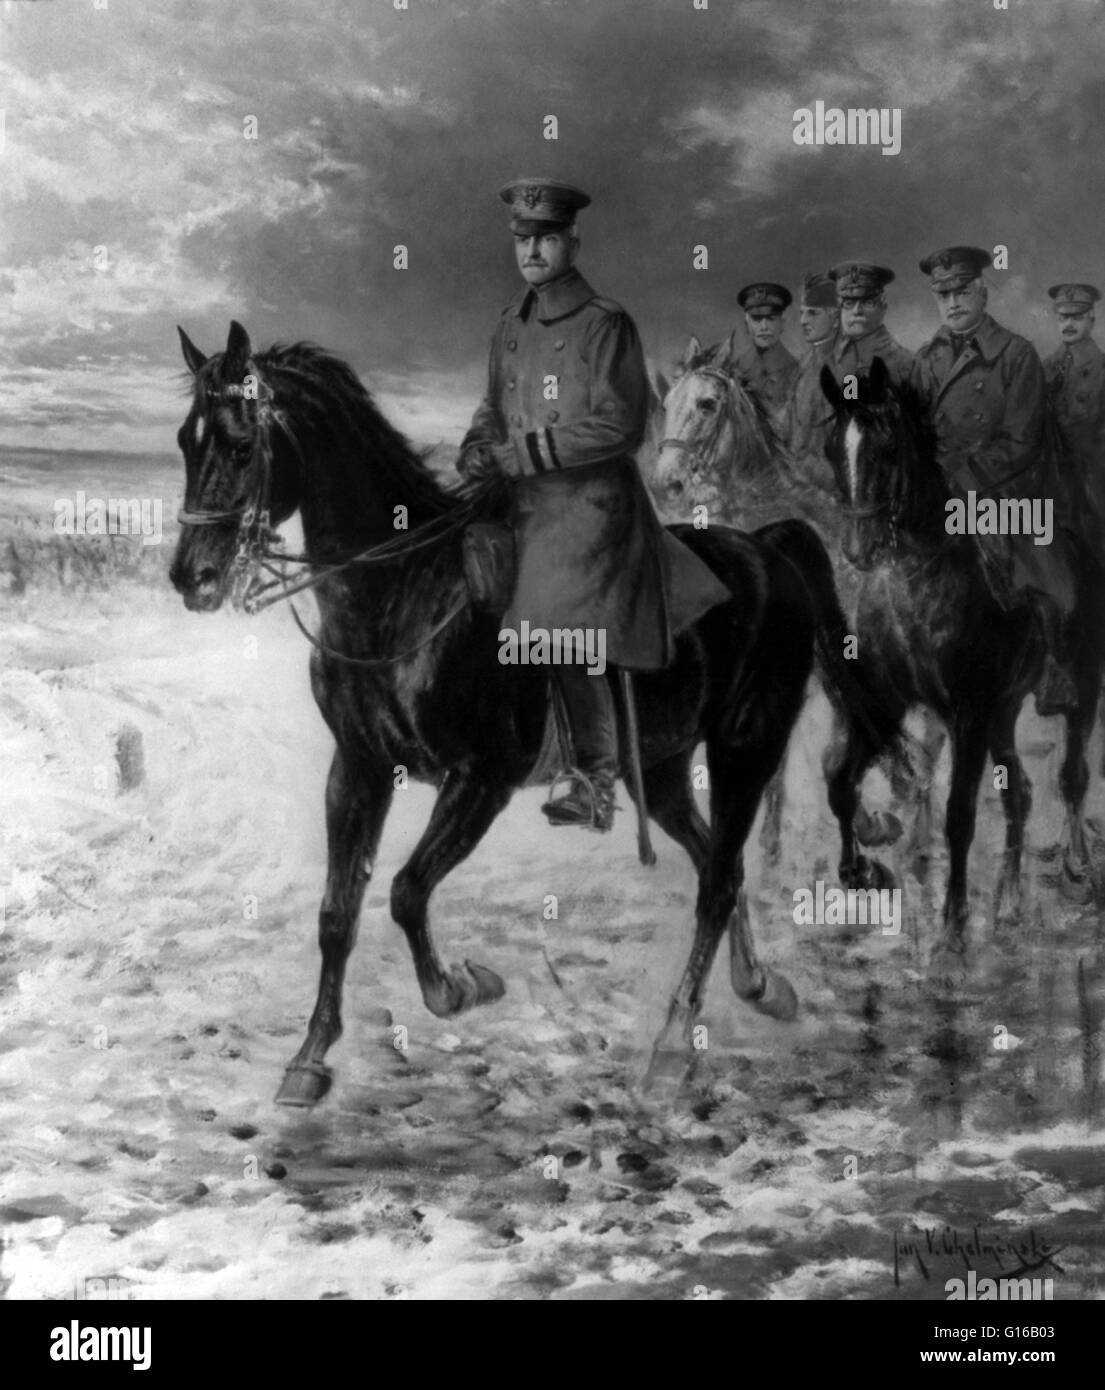 Pershing, on horseback, followed by others on horseback, all in uniform, 1919. John Joseph 'Black Jack' Pershing (September 13, 1860 - July 15, 1948) was a general officer in the United States Army. He graduated from West Point in the summer of 1886. In 1 Stock Photo